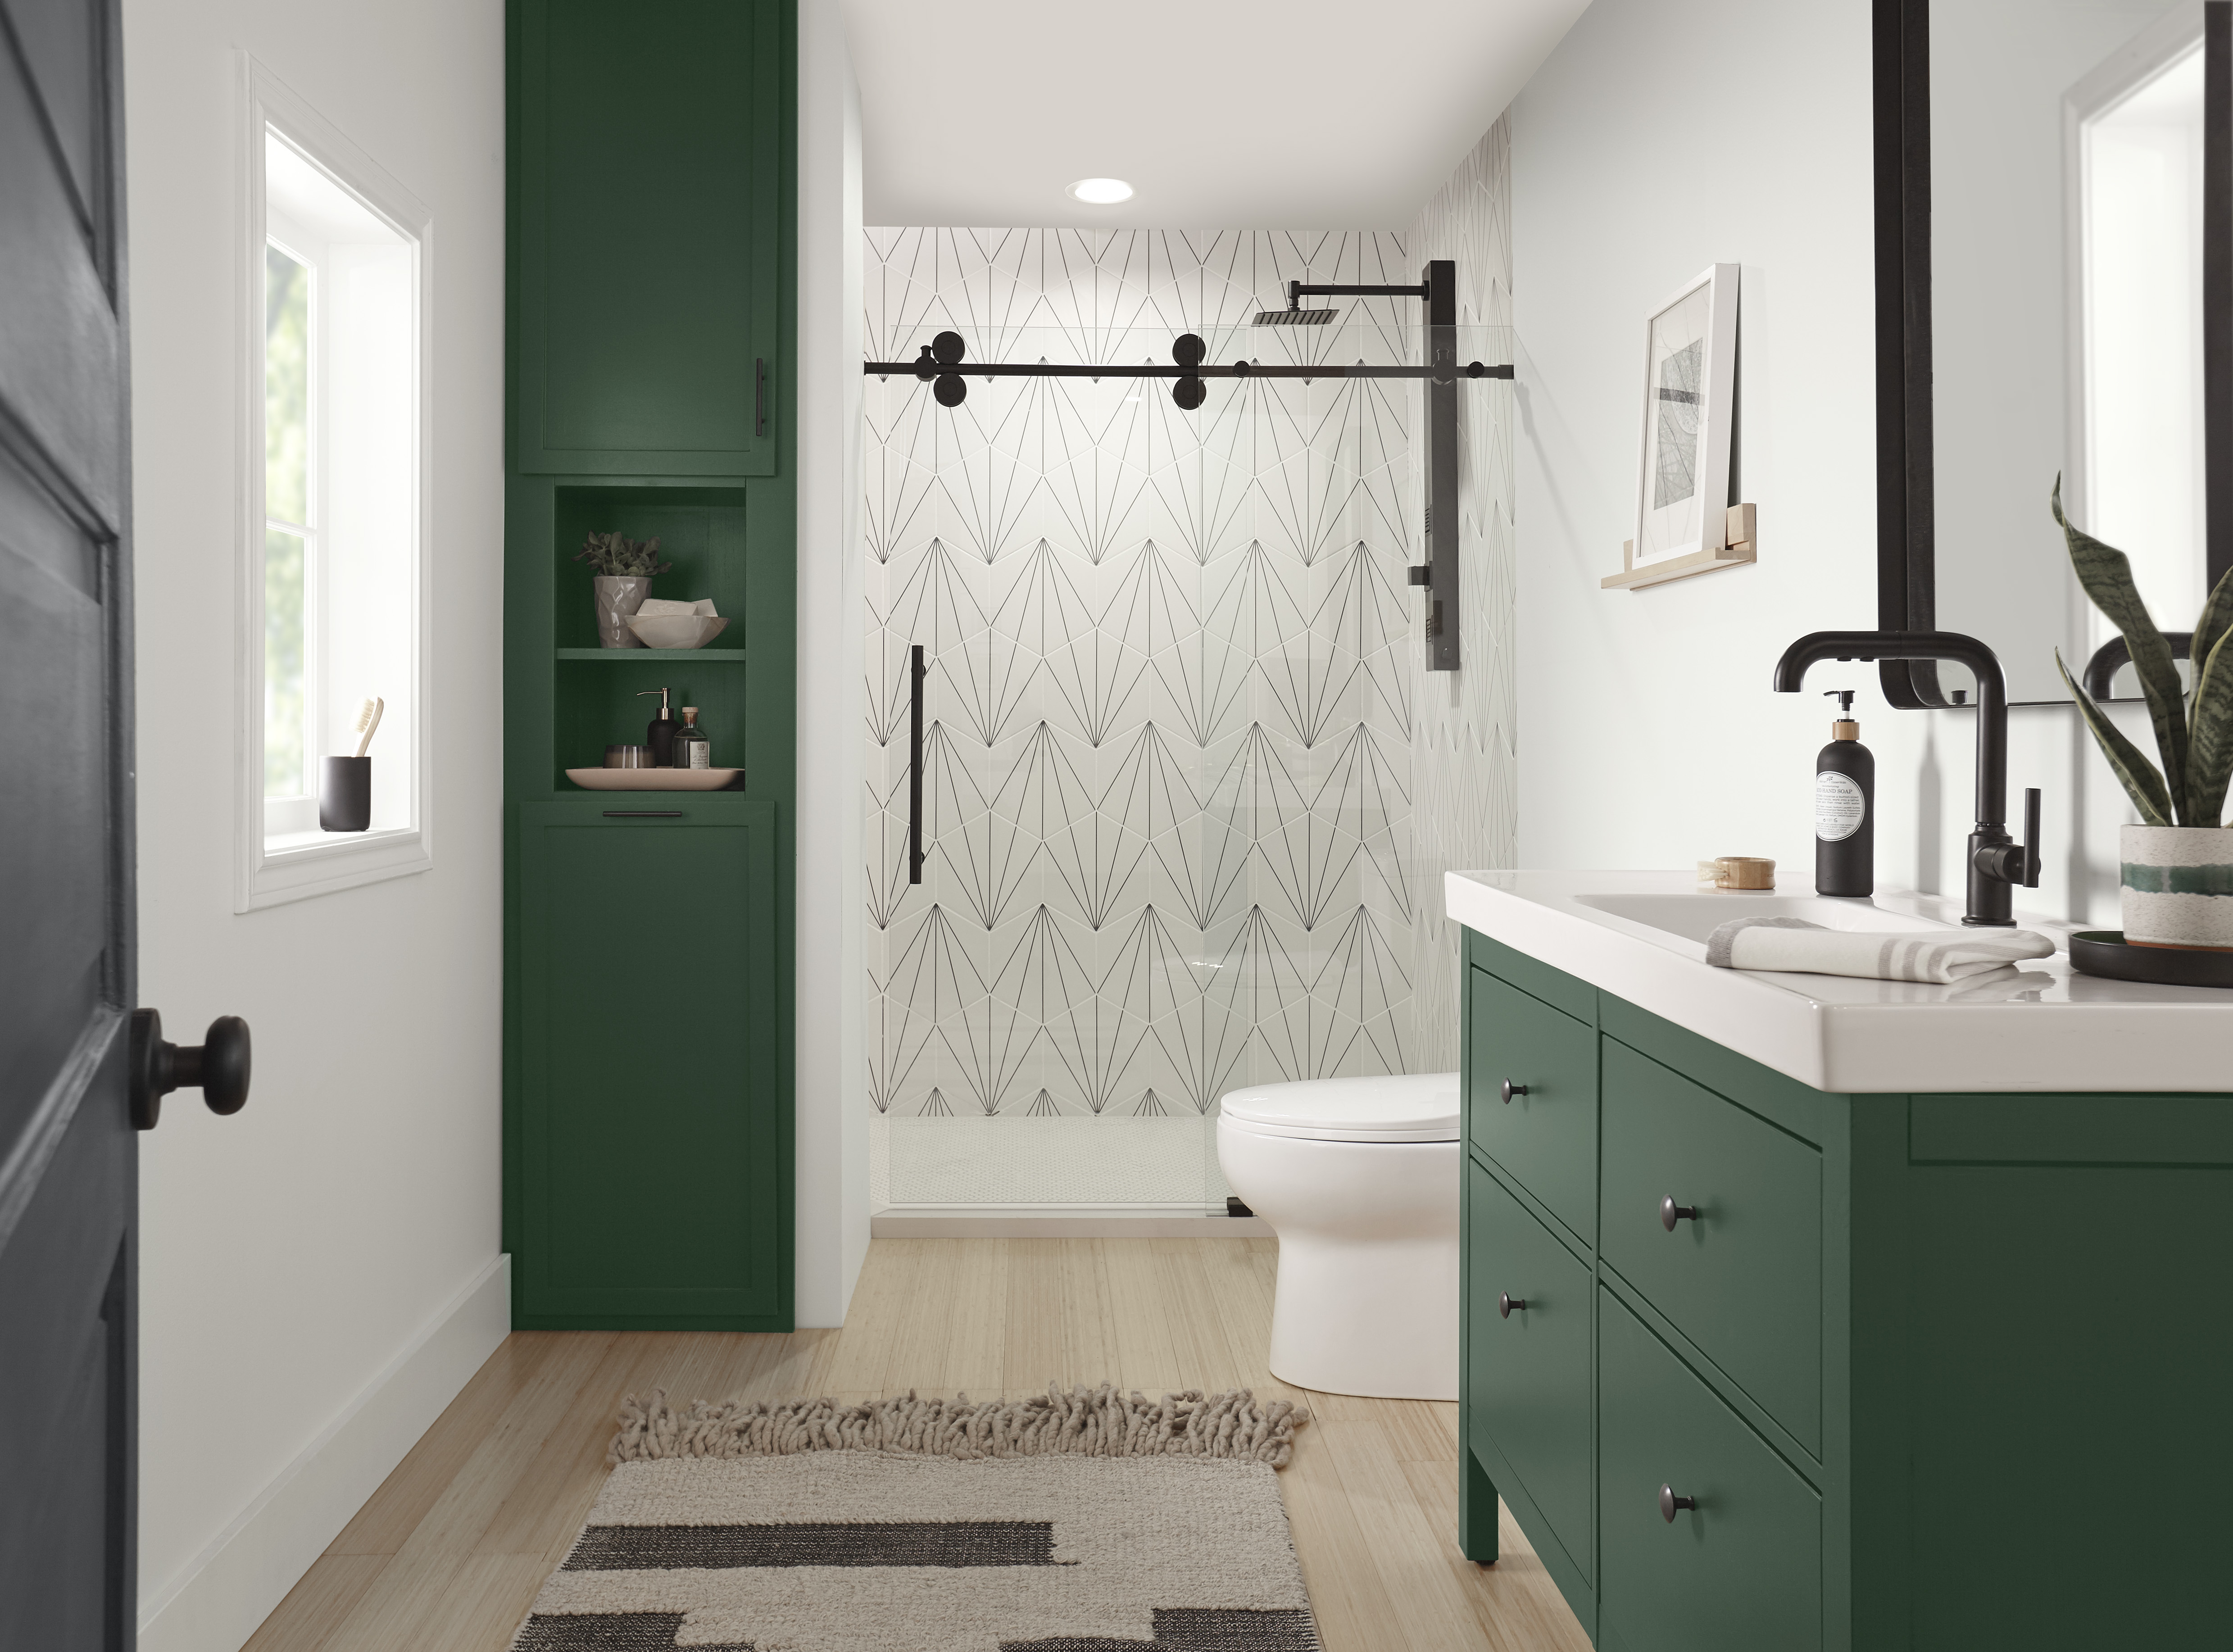 A modern bathroom with cabinets painted in a deep green colour and matte black hardware. 